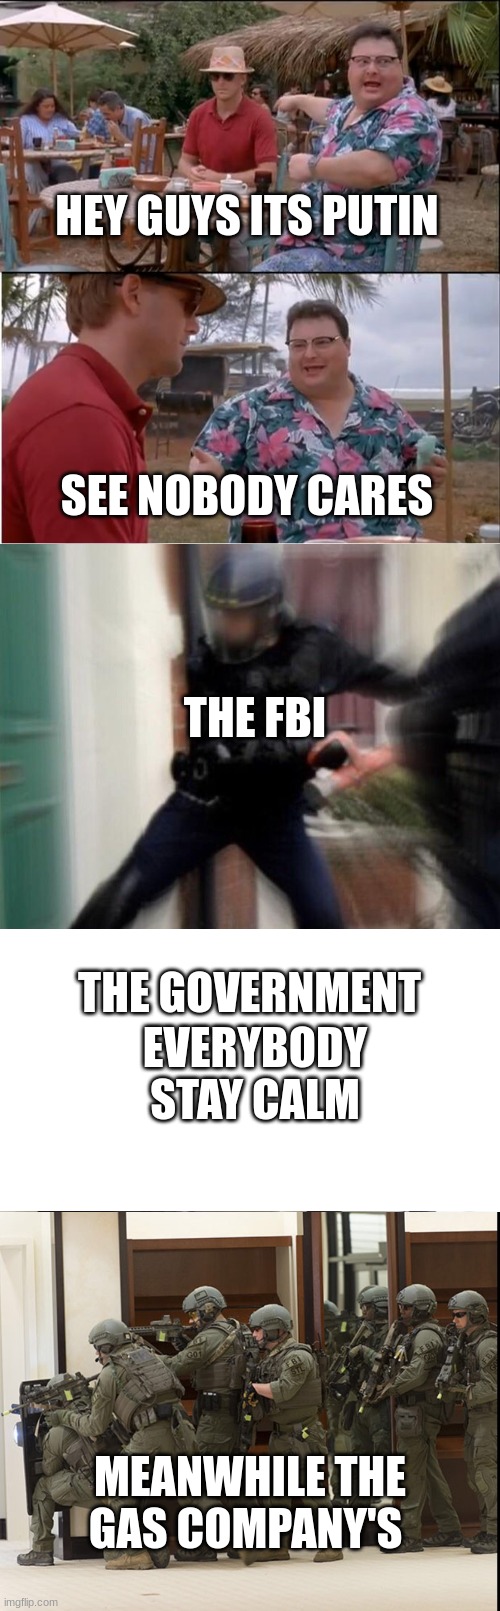 HEY GUYS ITS PUTIN; SEE NOBODY CARES; THE FBI; EVERYBODY STAY CALM; THE GOVERNMENT; MEANWHILE THE GAS COMPANY'S | image tagged in memes,see nobody cares,fbi door breach,fbi open up,fbi swat | made w/ Imgflip meme maker